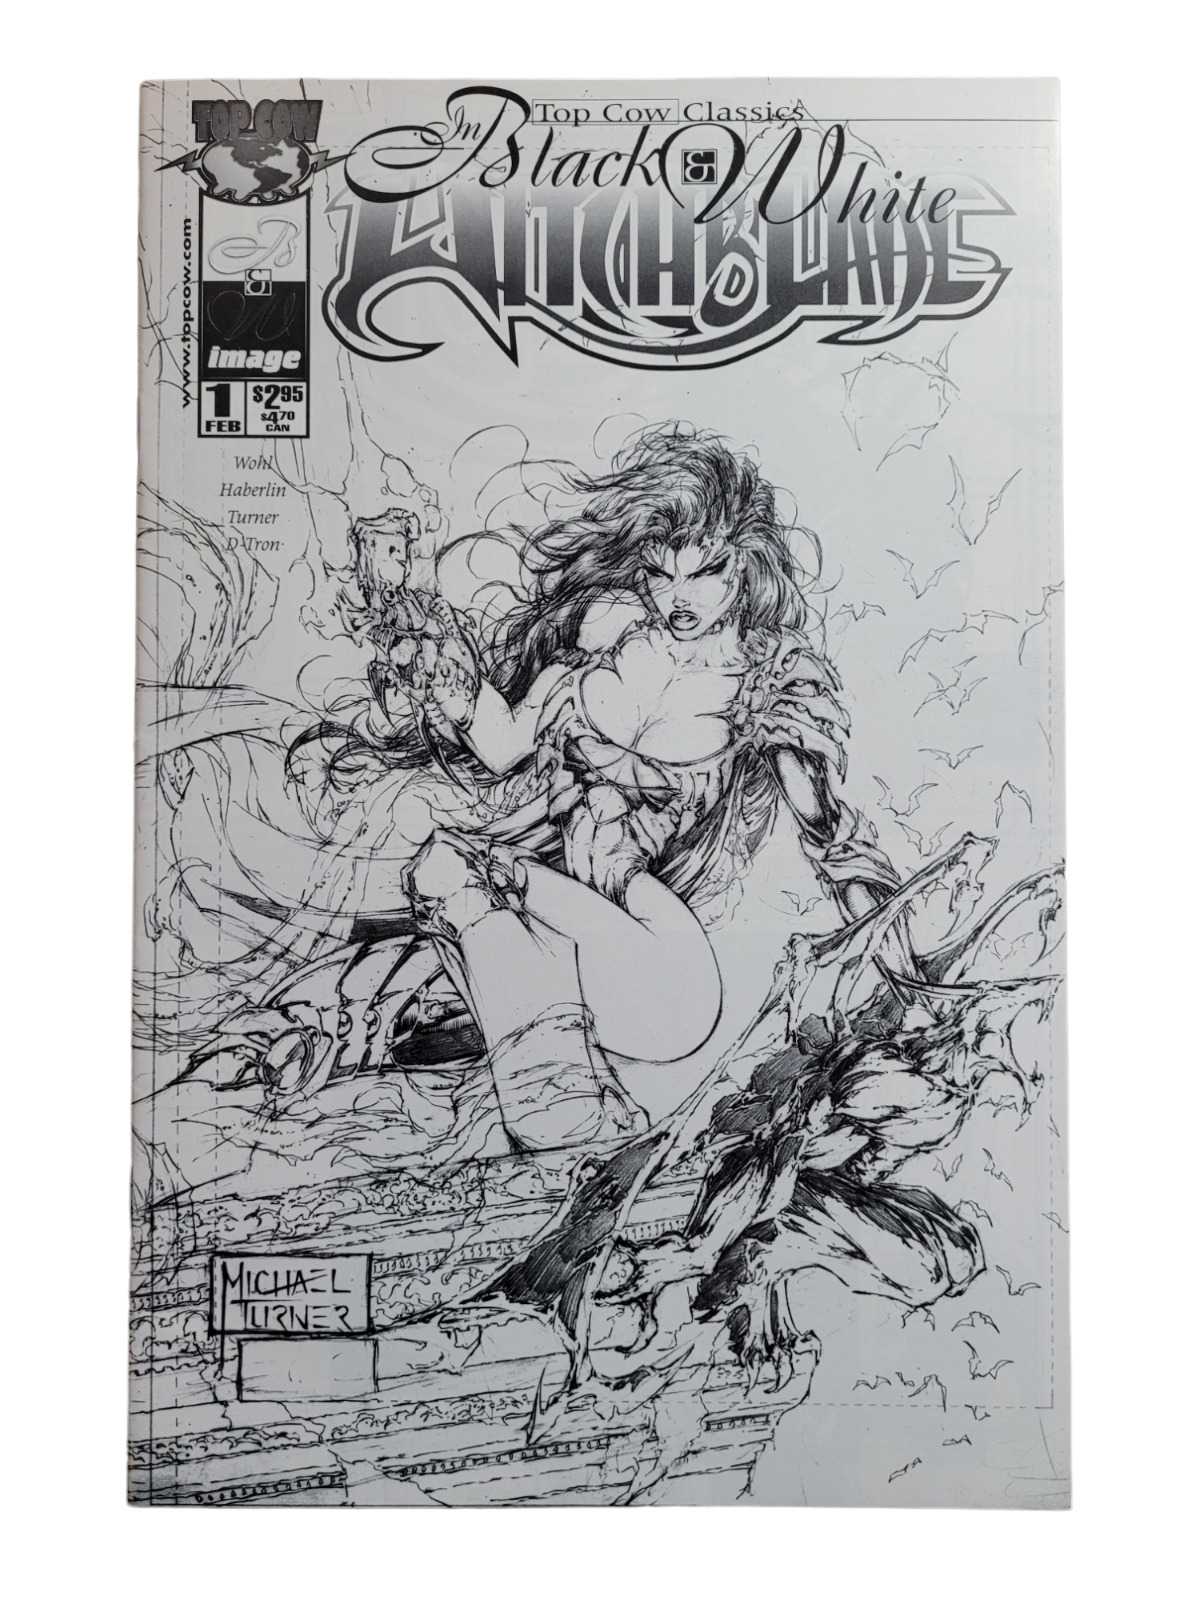 TOP COW CLASSICS IN BLACK AND WHITE WITCHBLADE #1 9.4 NM 2000 SKETCH COVER IMAGE